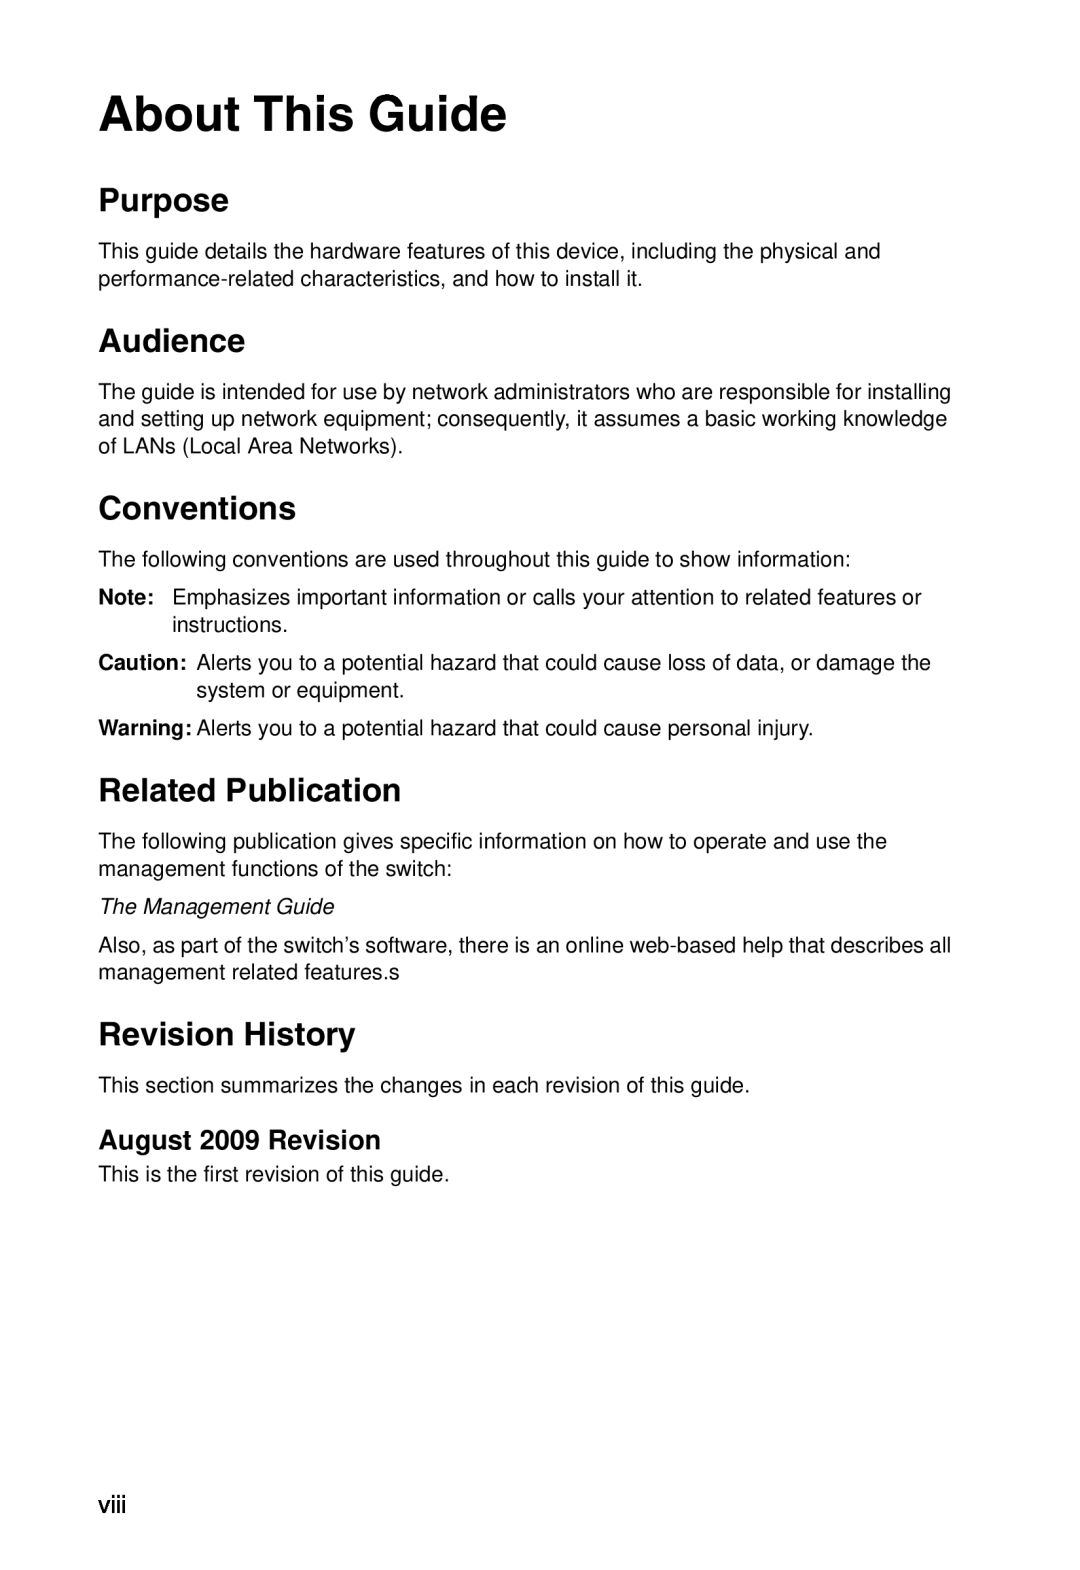 SMC Networks SMC8926EM, SMC8950EM Purpose, Audience, Conventions, Related Publication, Revision History, About This Guide 